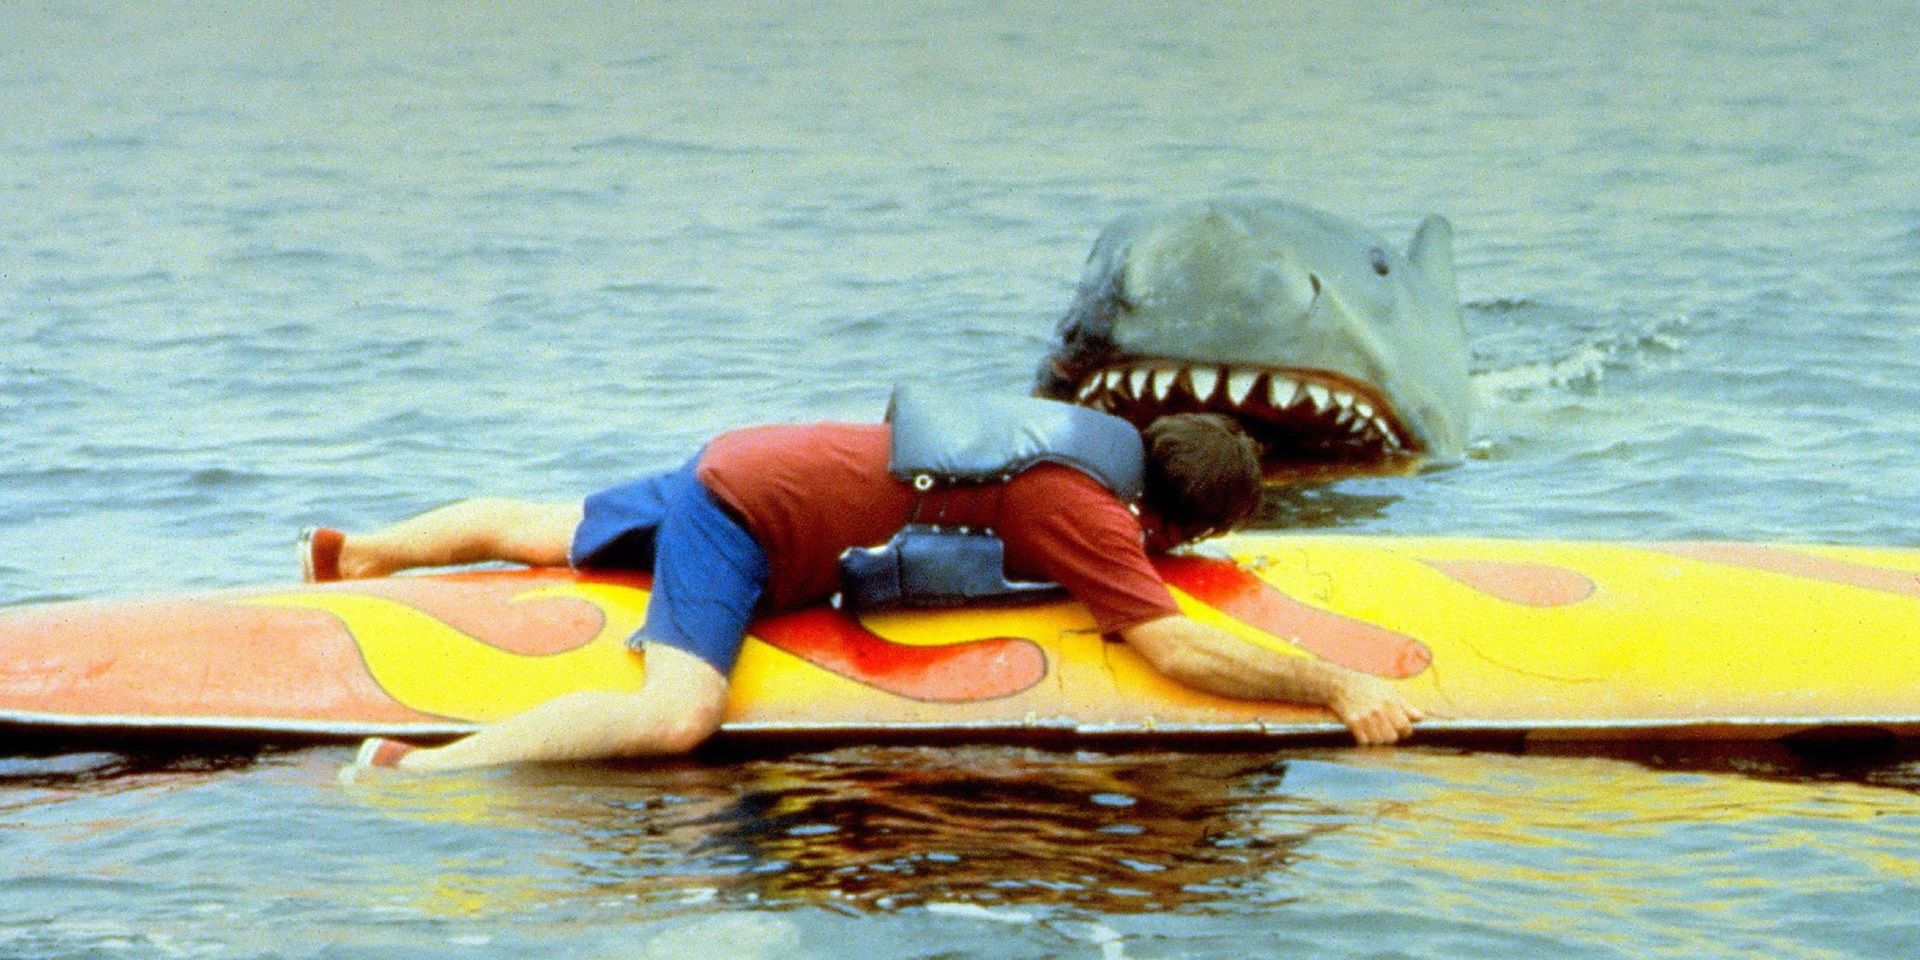 A shark attack in Jaws 2